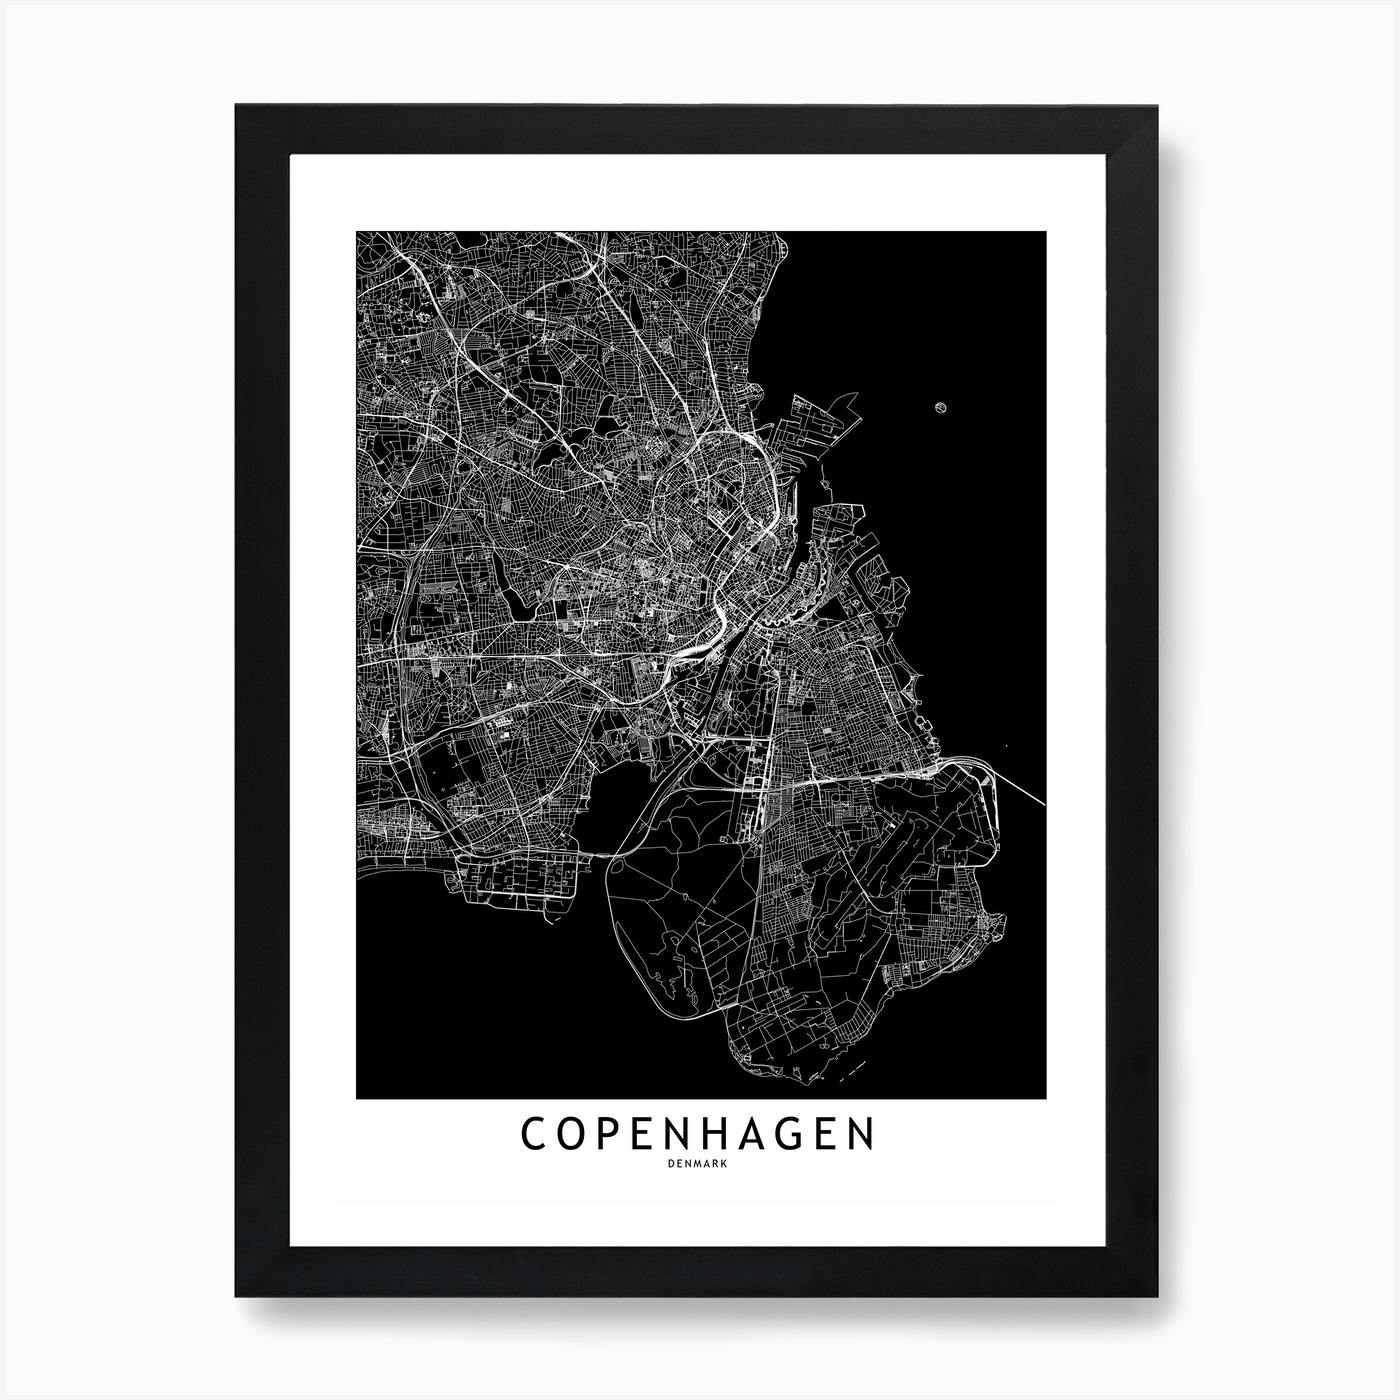 MOSCOW CITY MAP POSTER PRINT MODERN CONTEMPORARY CITIES TRAVEL IKEA FRAMES 